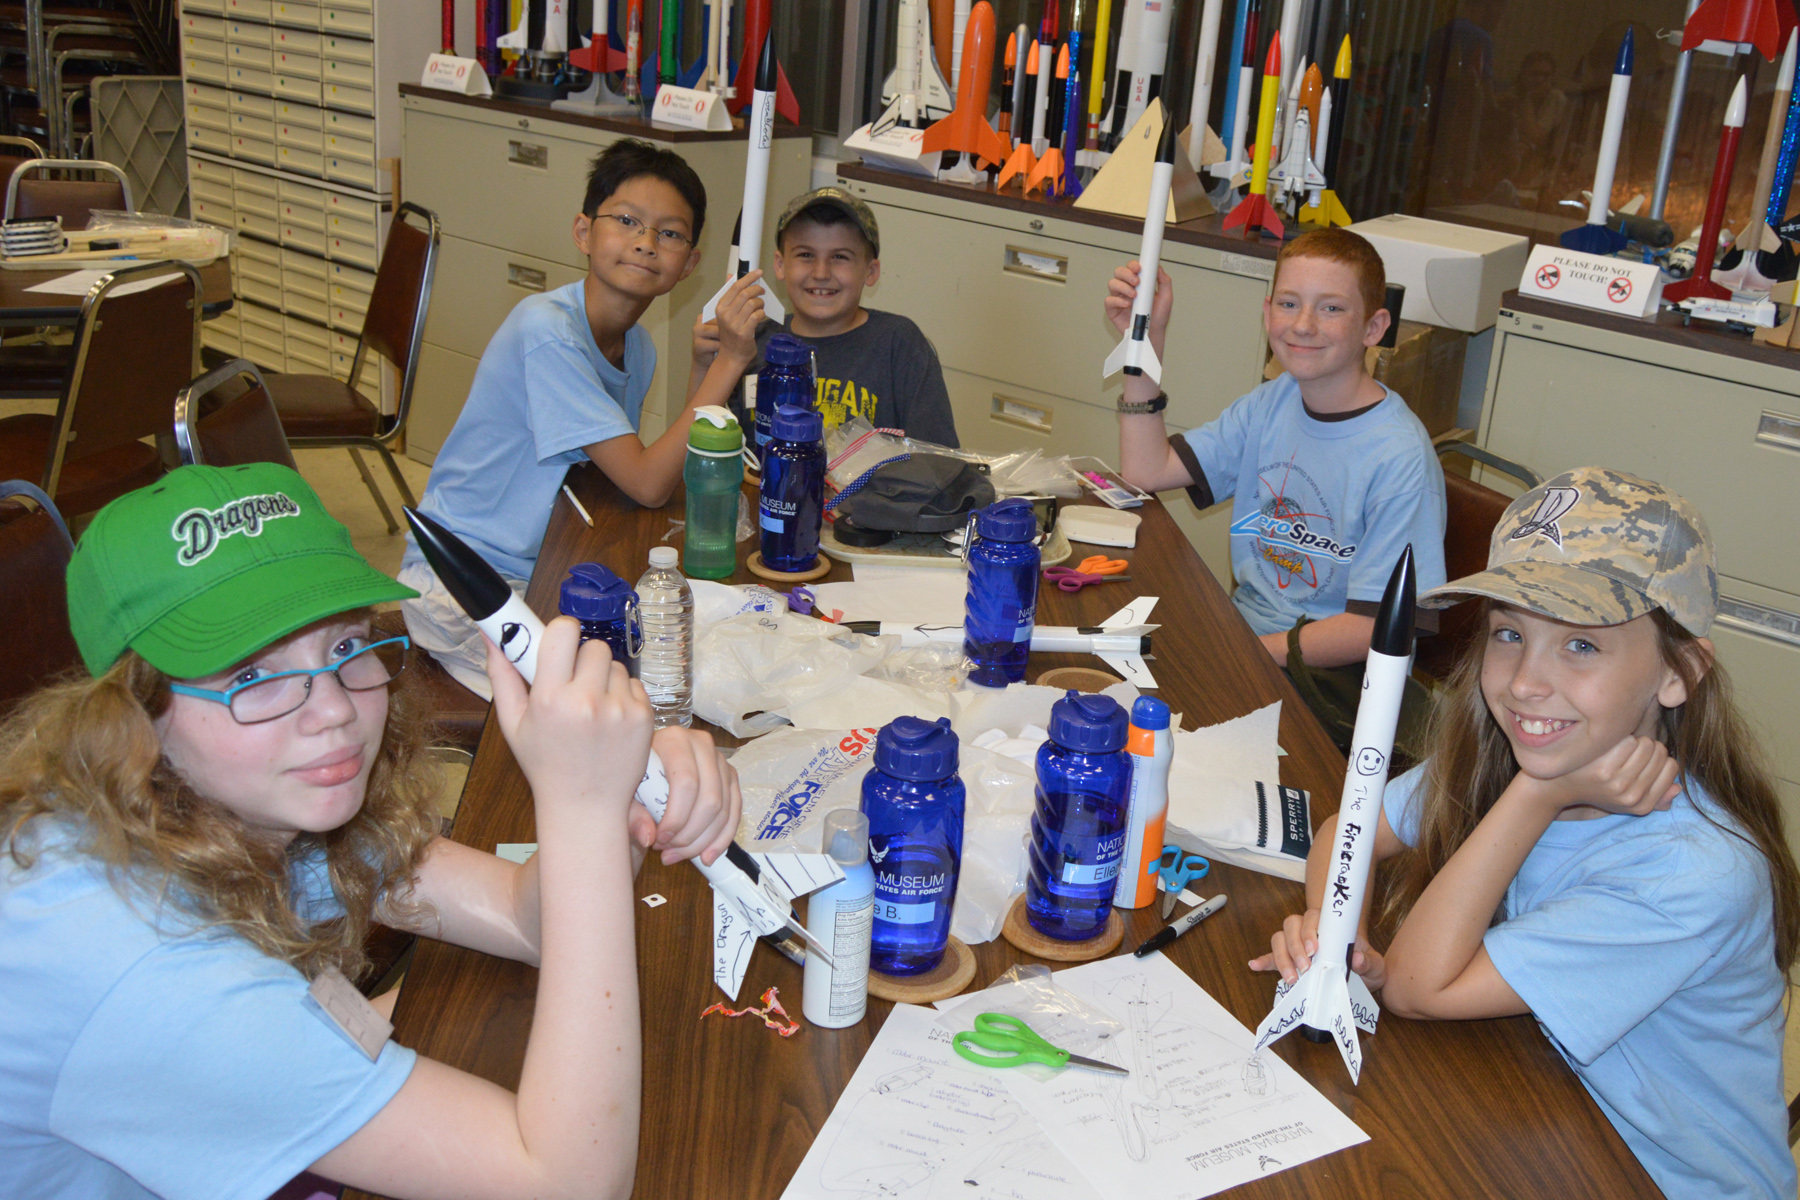 Image of 4 students sitting at a table covered with their rocket building supplies and blue water bottles. They are holding up the white rockets that they built.